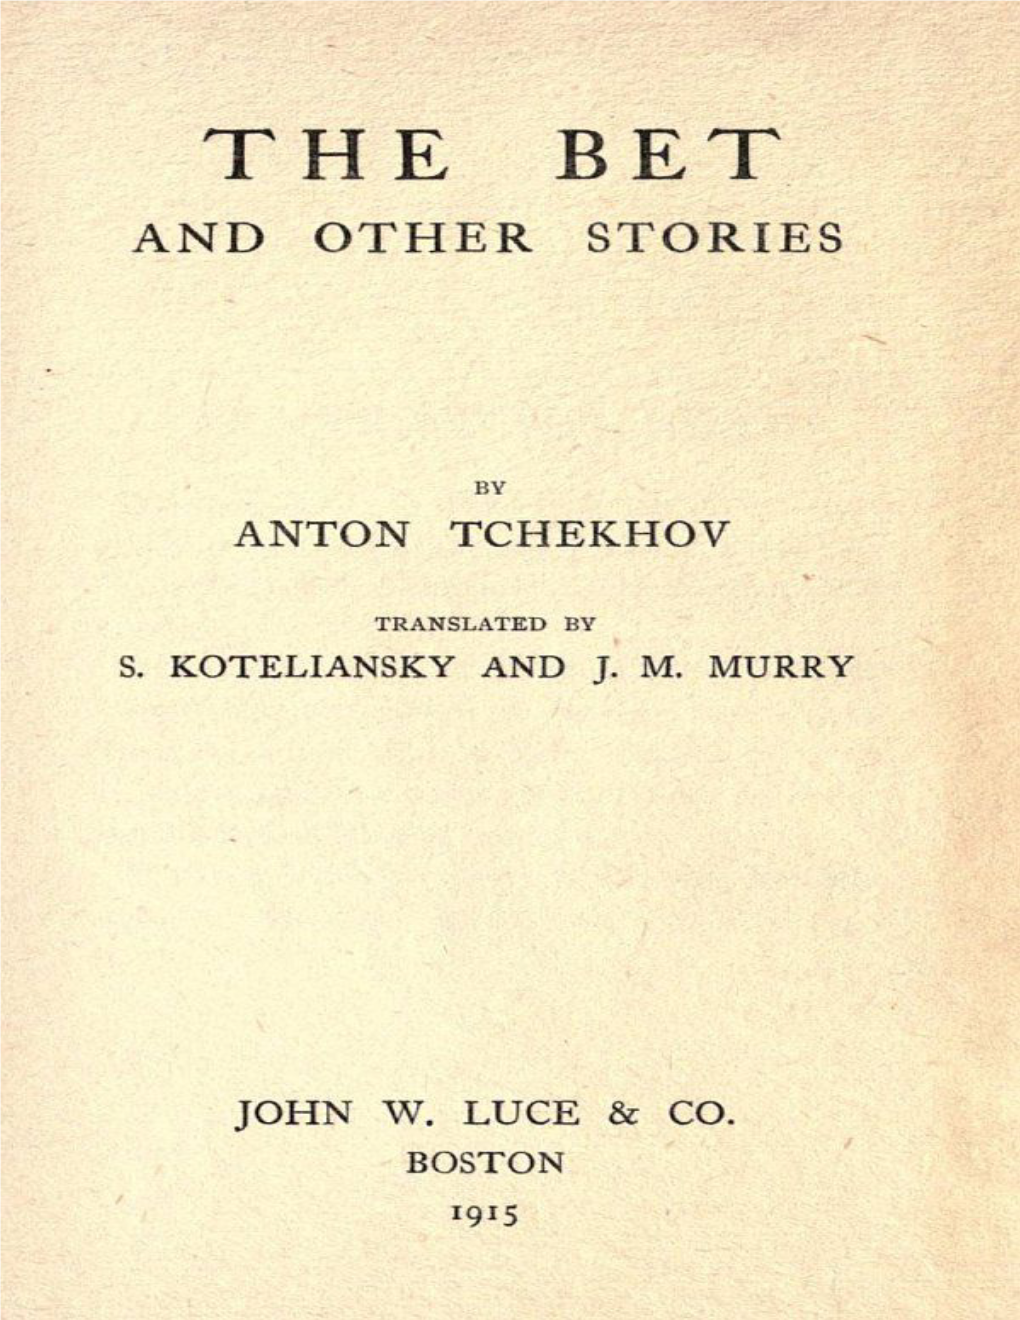 The Bet and Other Stories, by Anton Tchekhov